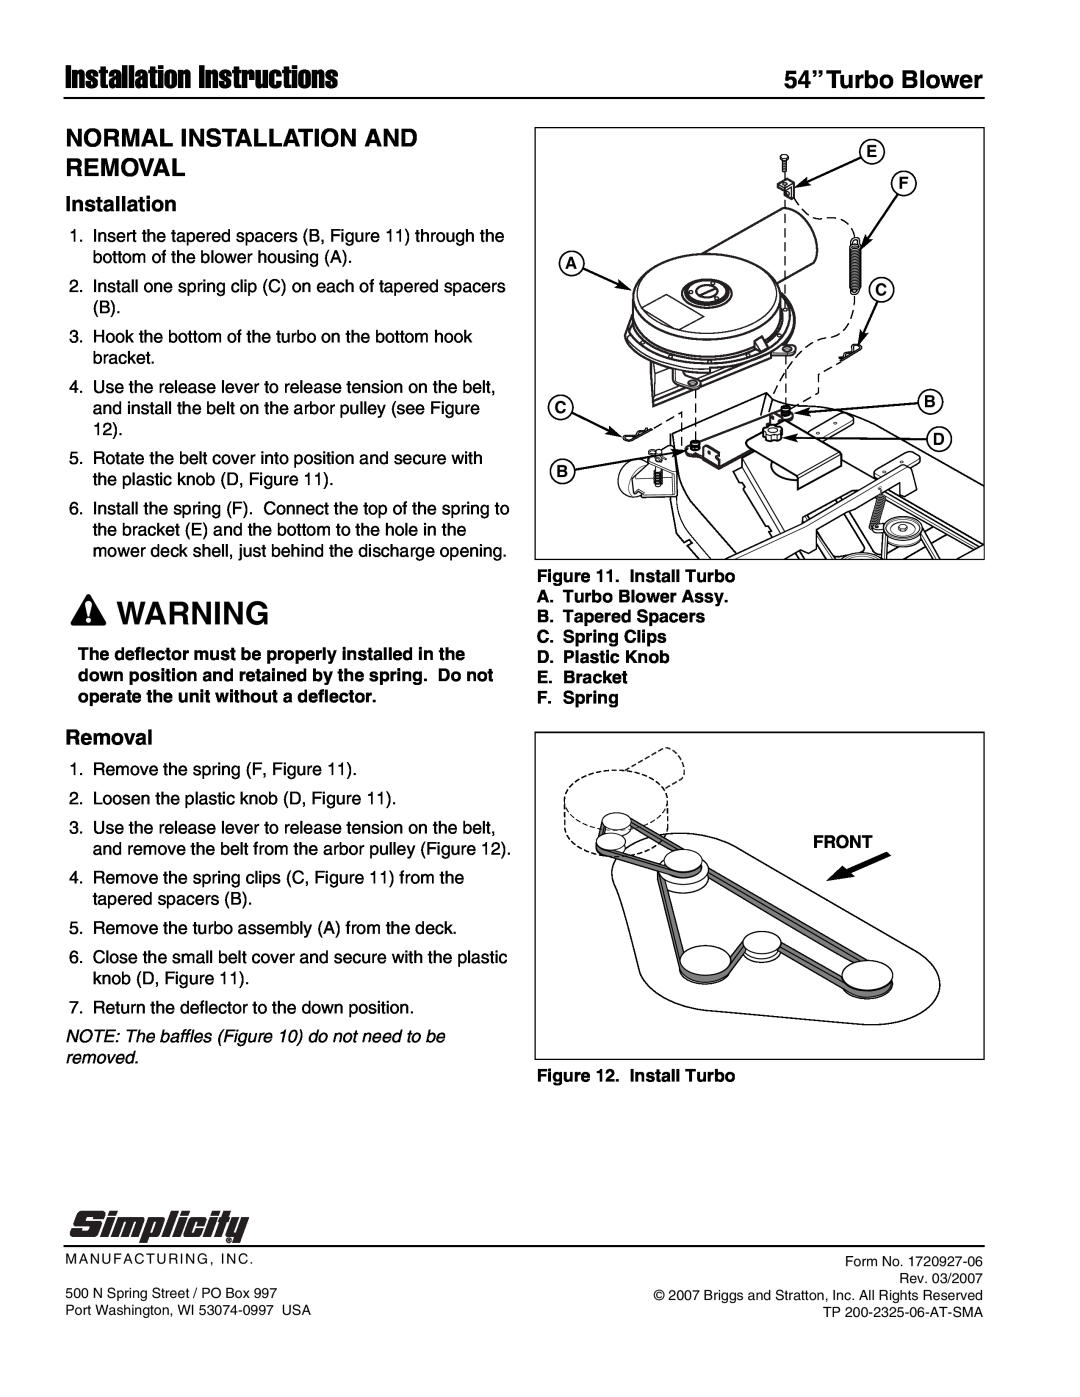 Snapper 1693706, 1695299 Normal Installation And Removal, Installation Instructions, 54”Turbo Blower 